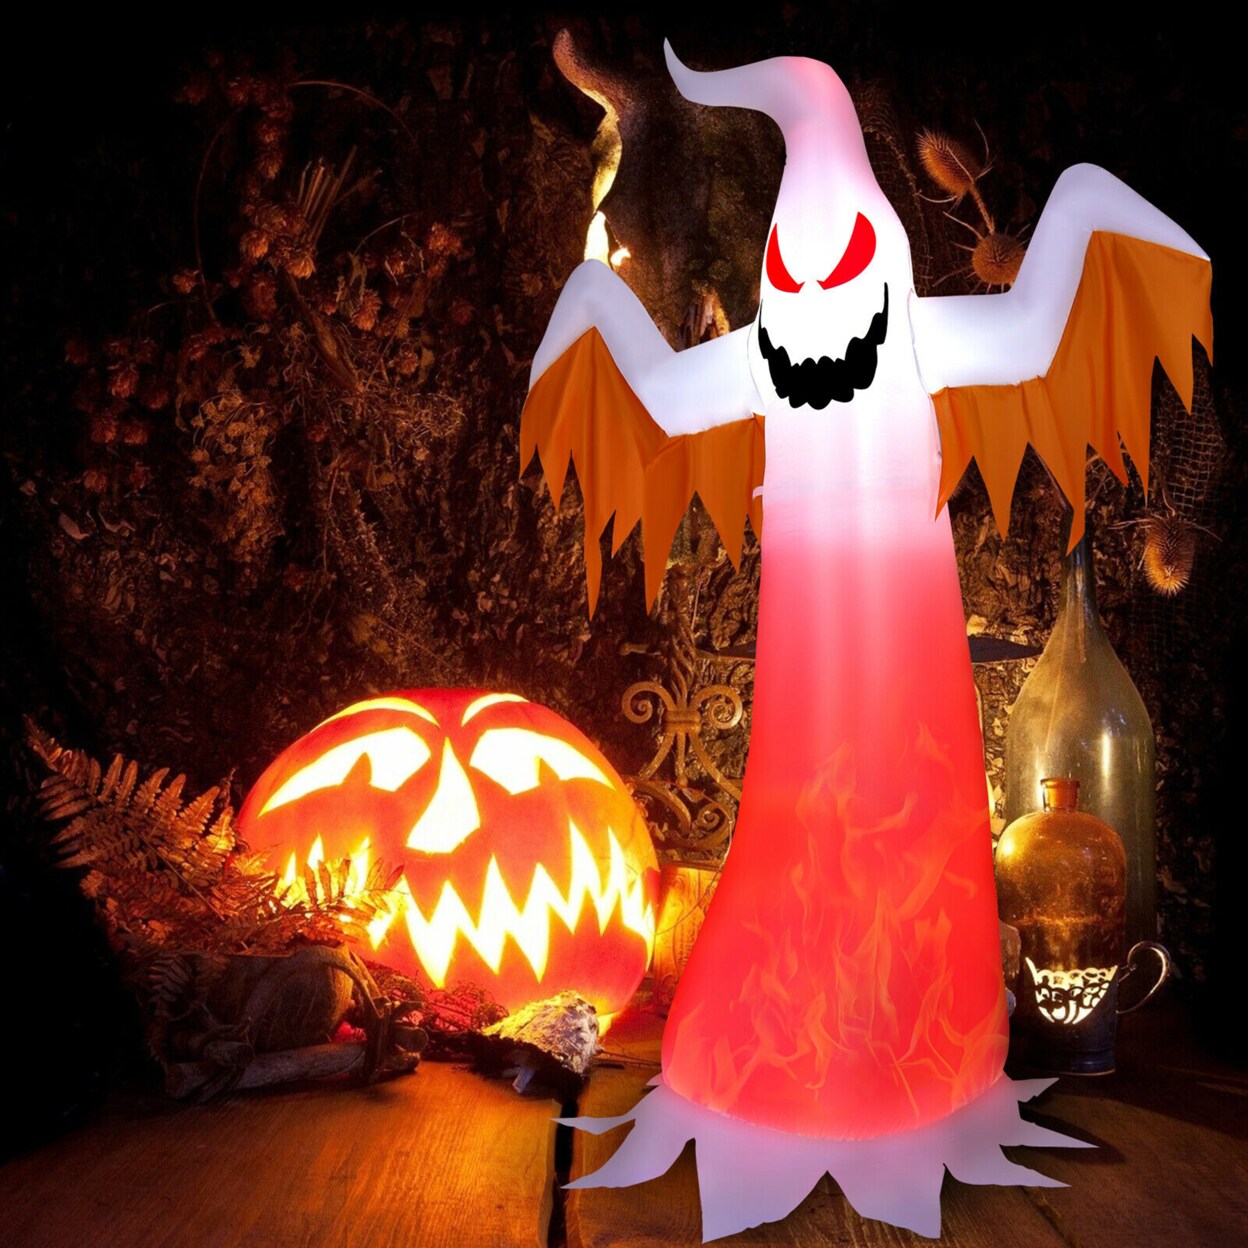 Gymax 8ft Inflatable Halloween Ghost Blow Up Decoration w/ Built-in Flame Light